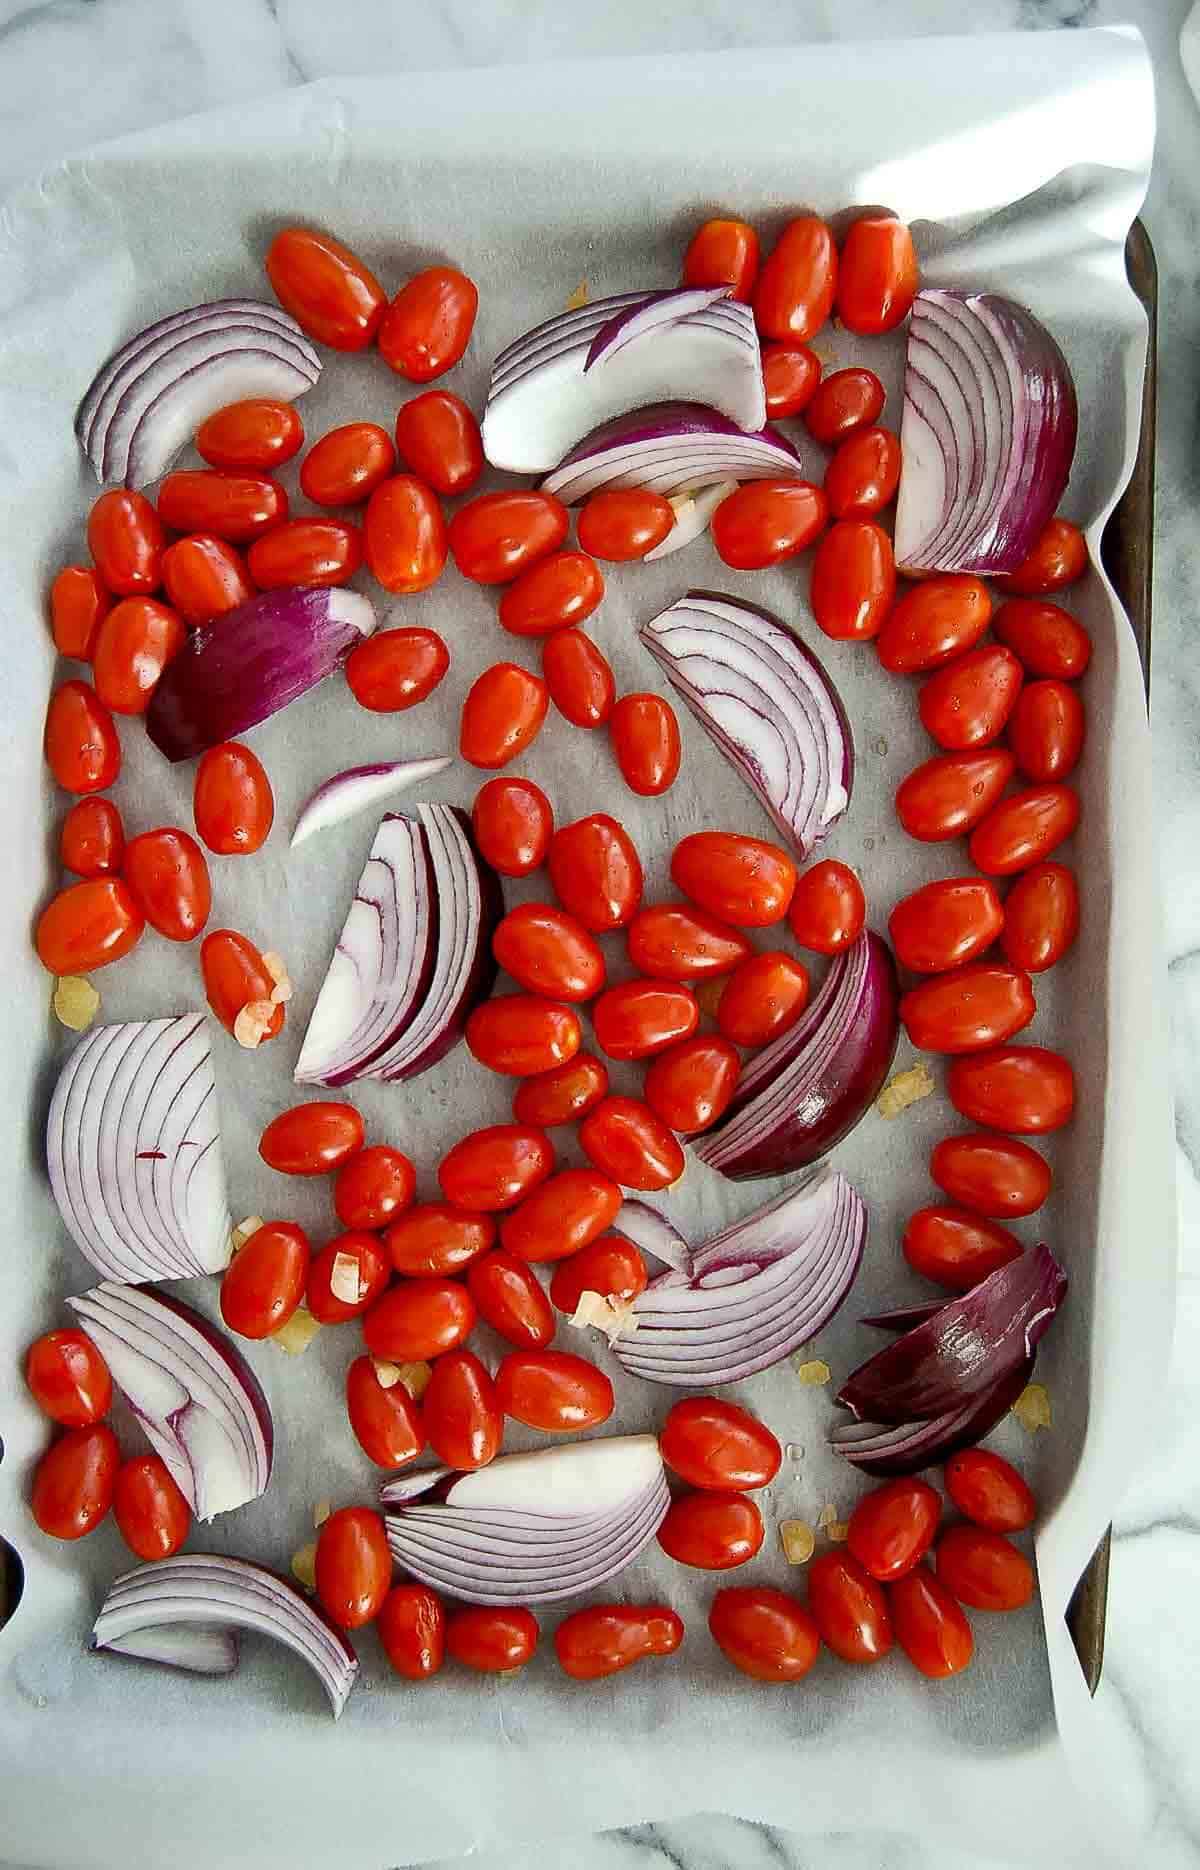 grape tomatoes, red onion wedges and garlic on sheet pan.